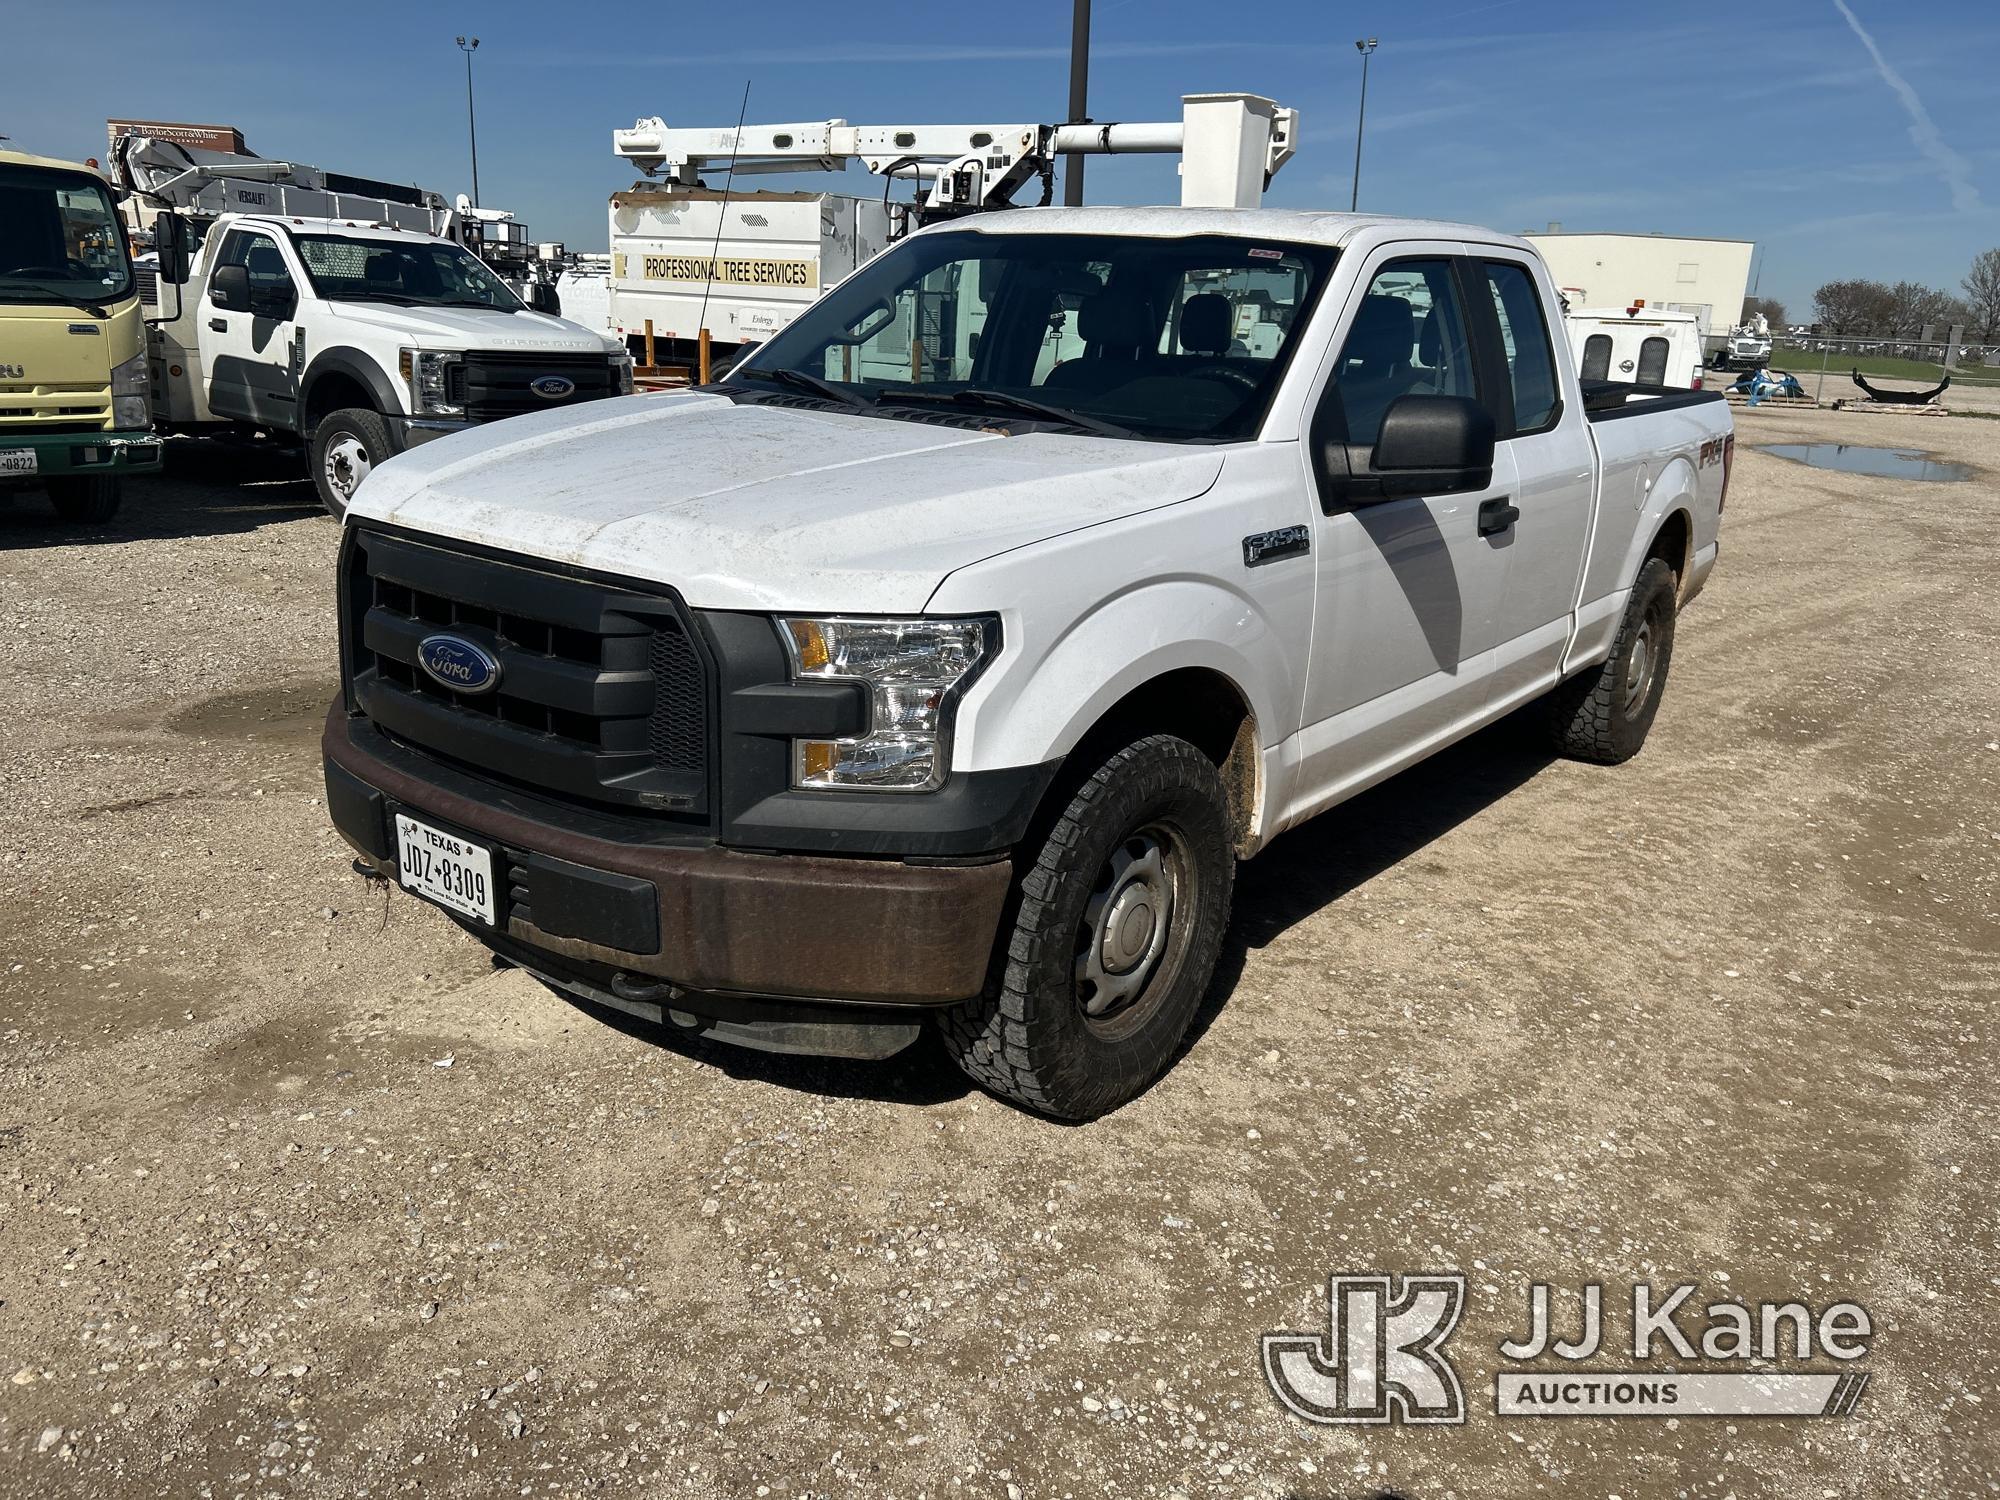 (Waxahachie, TX) 2016 Ford F150 4x4 Extended-Cab Pickup Truck Runs & Moves, Cracked Windshield